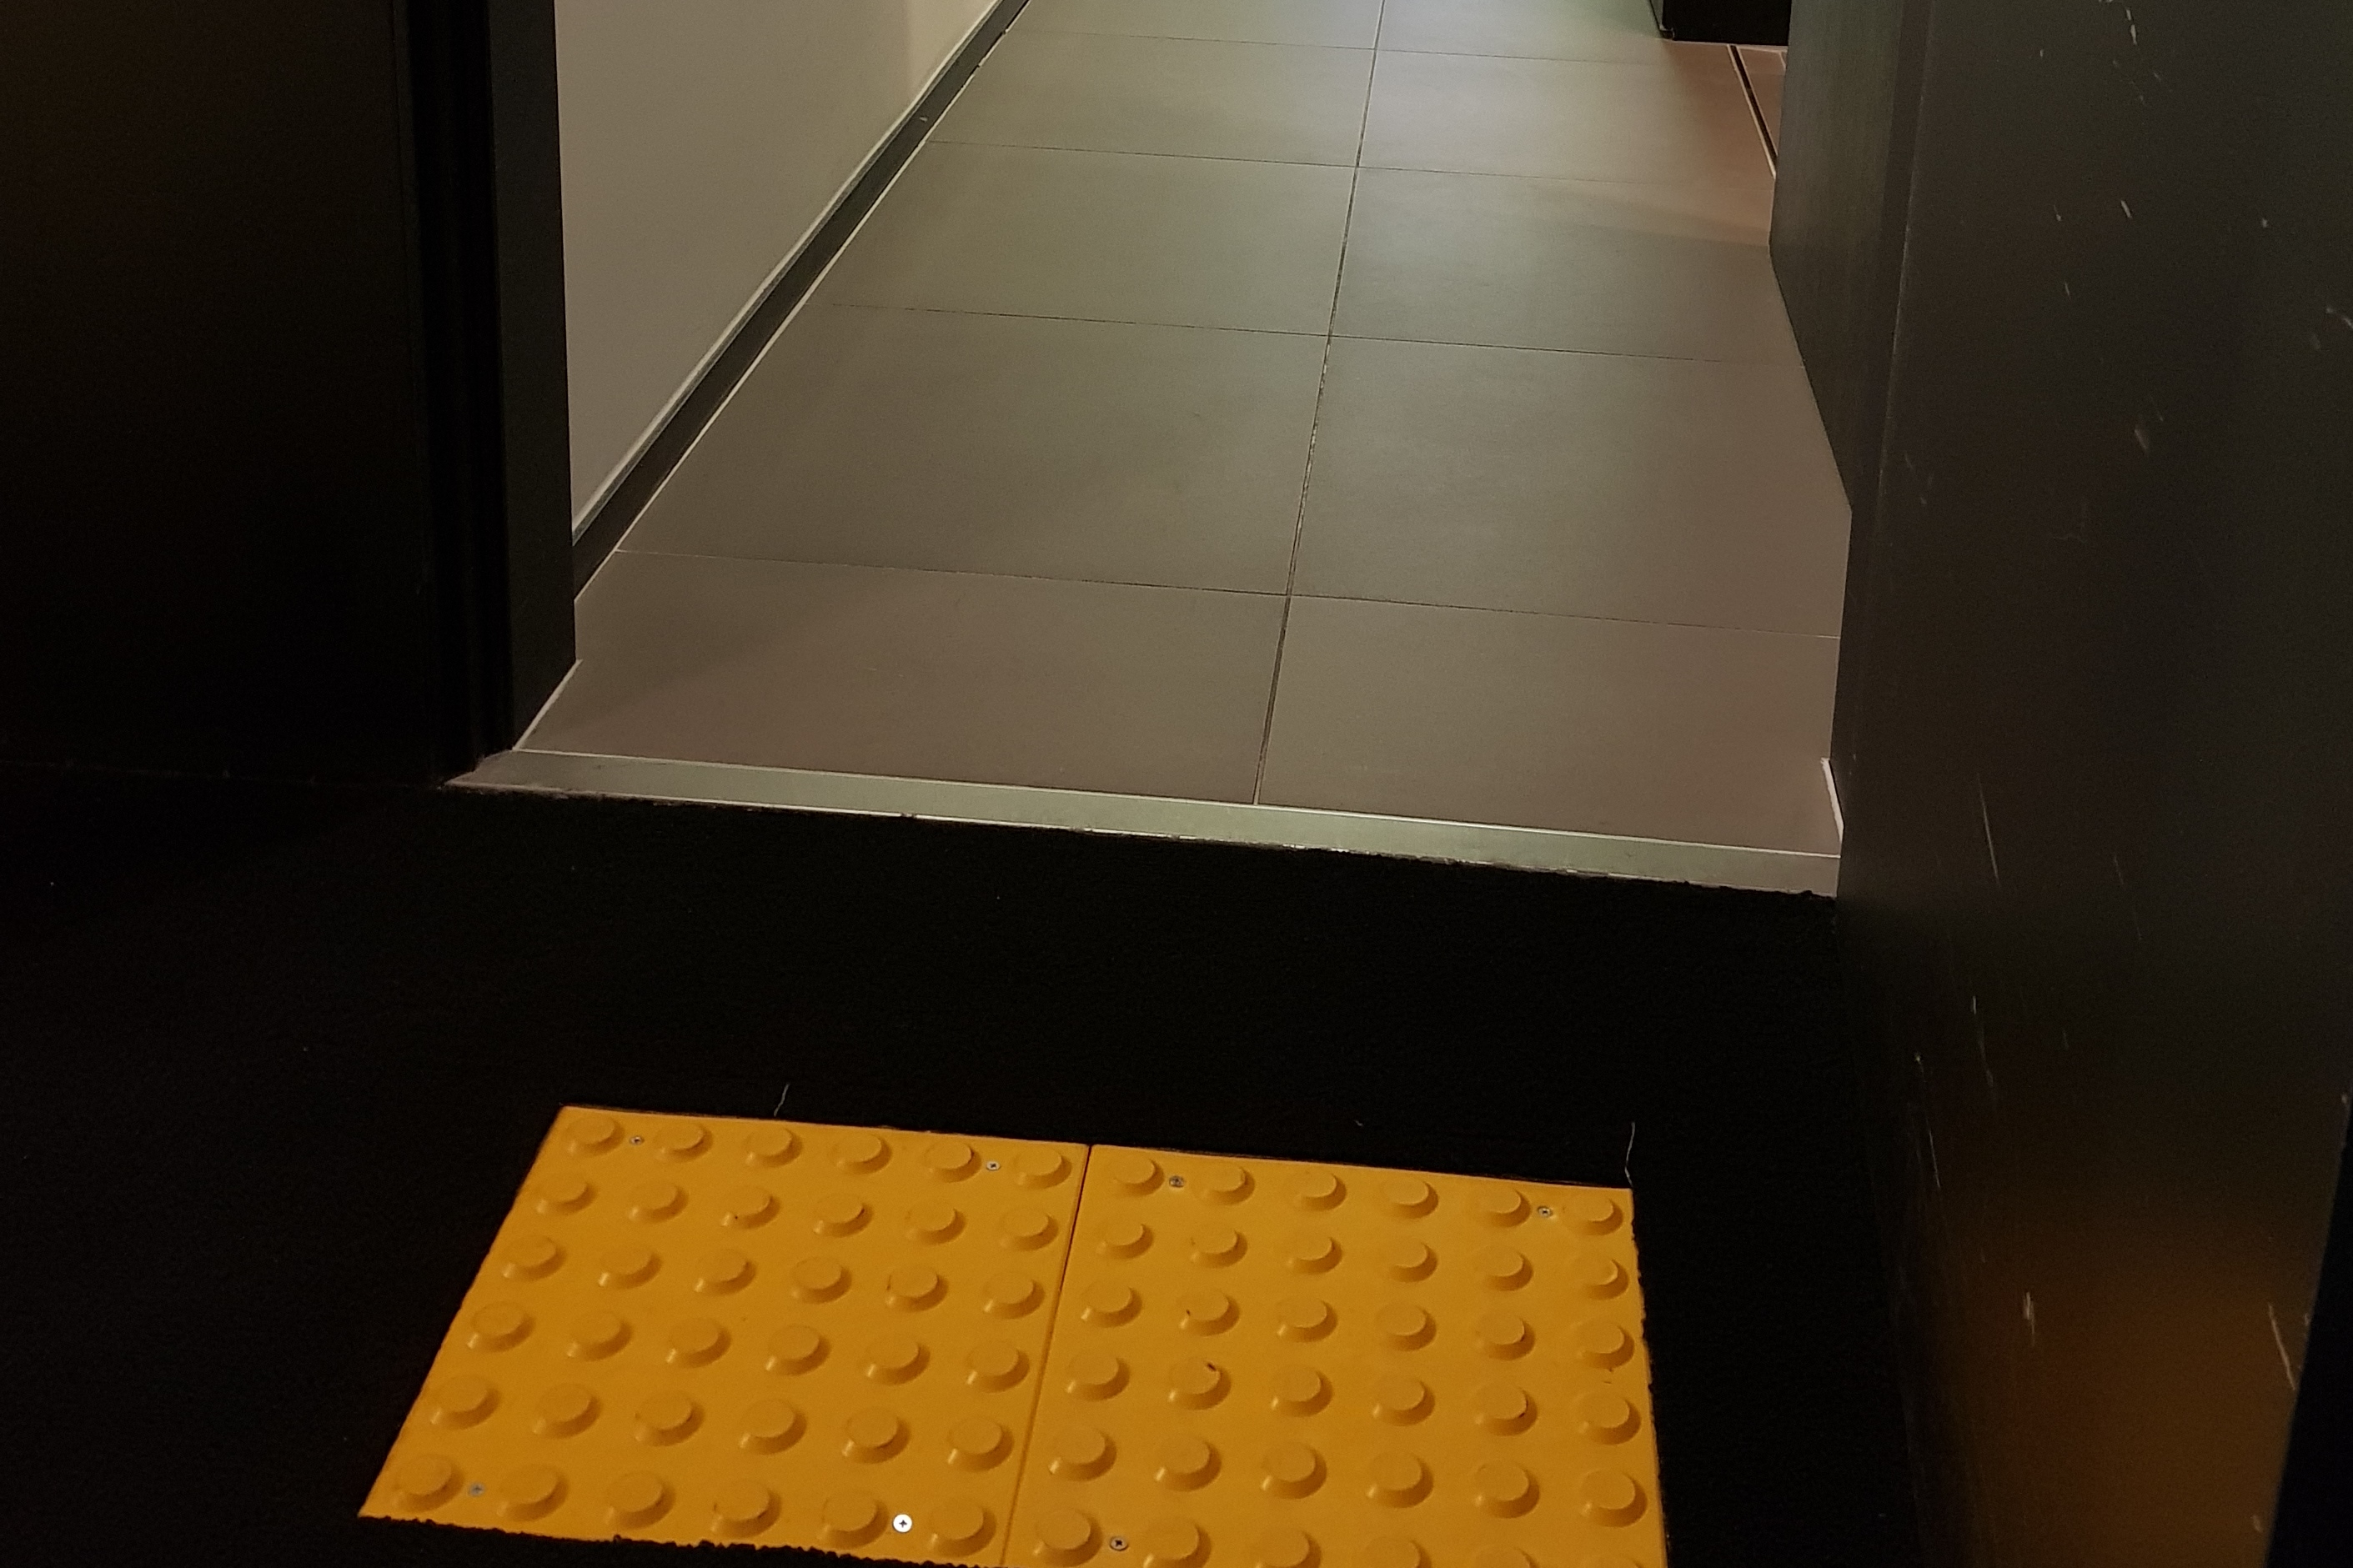 Guestroom doorway0 : Room entrance of the Sotetsu Hotels The Splaisir Seoul Myeongdong with tactile flooring
